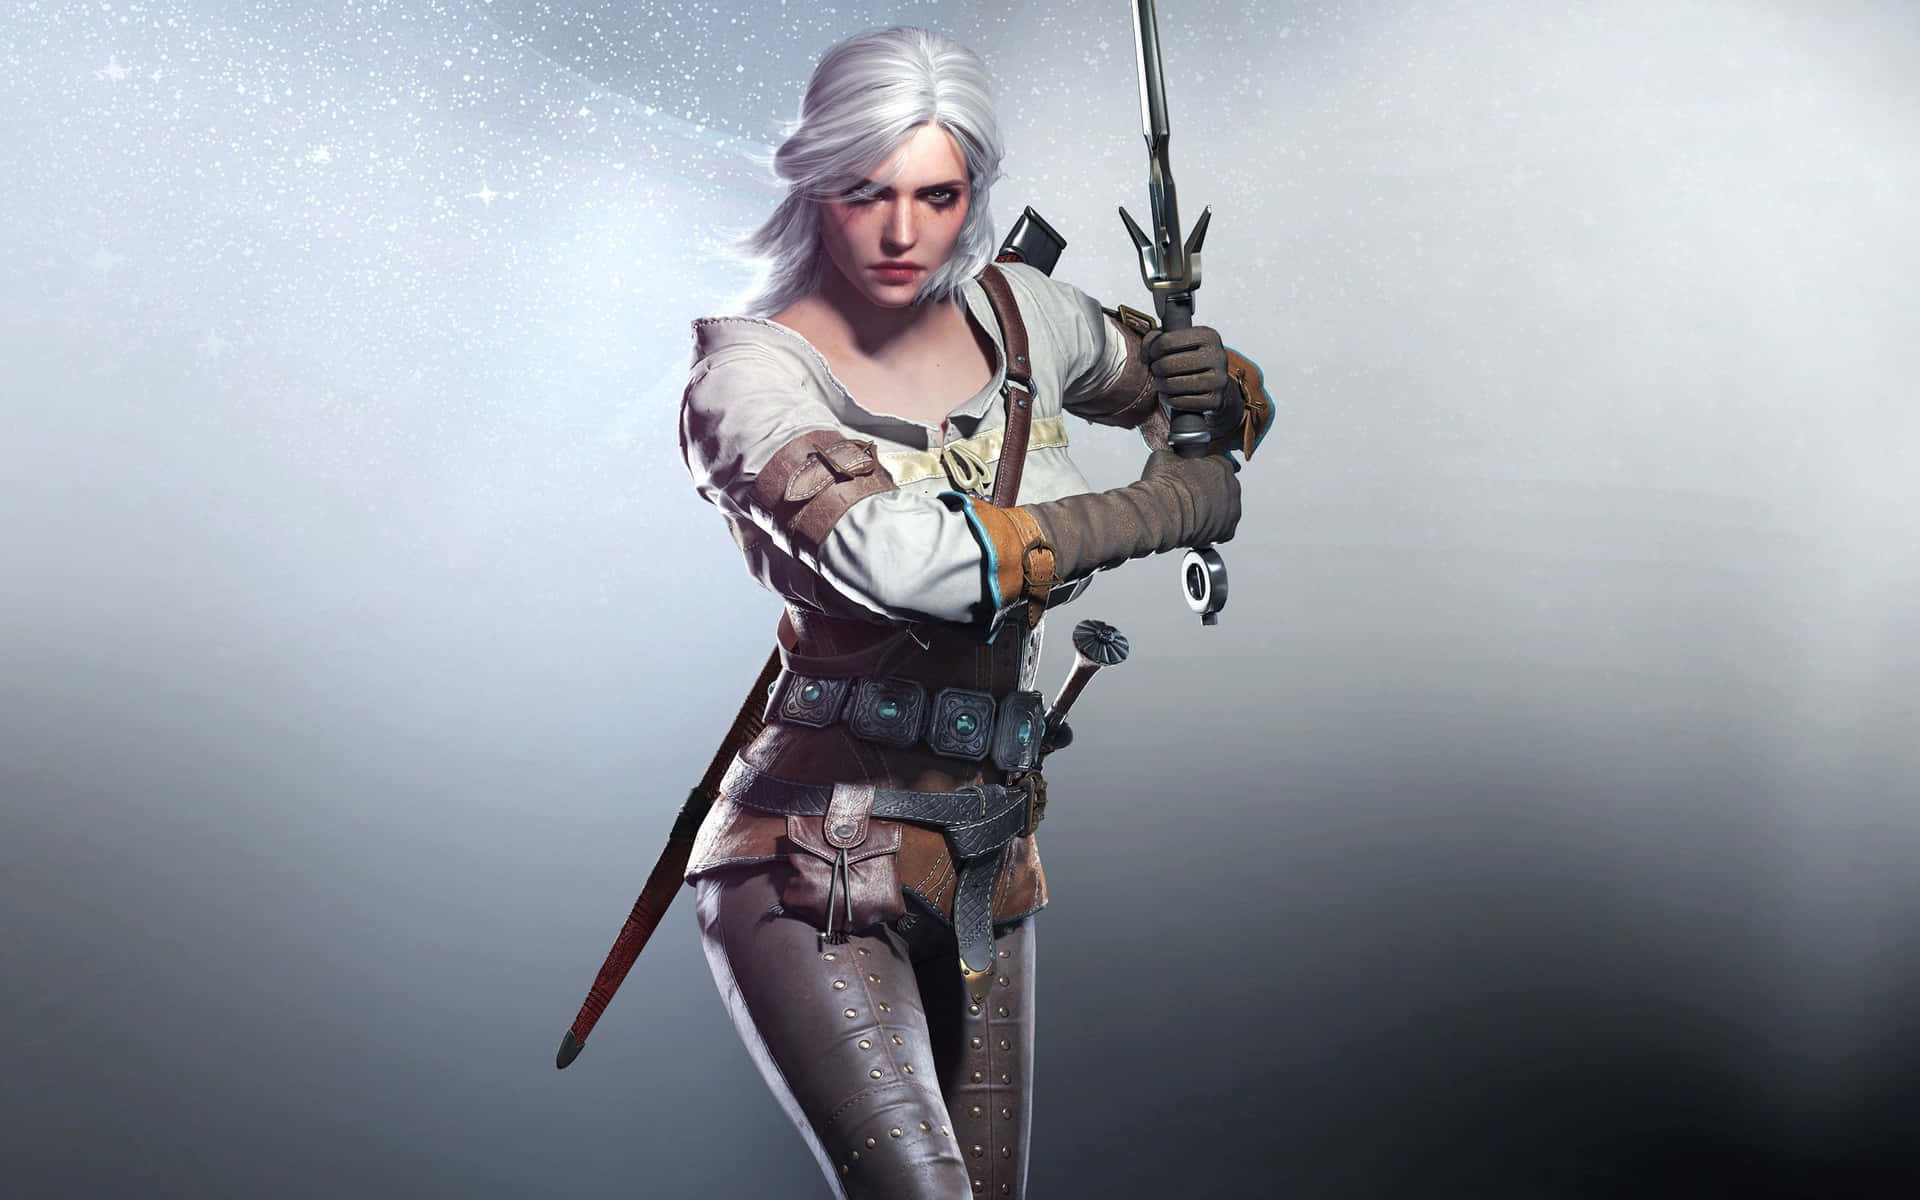 Explore the magnificent world of the Witcher